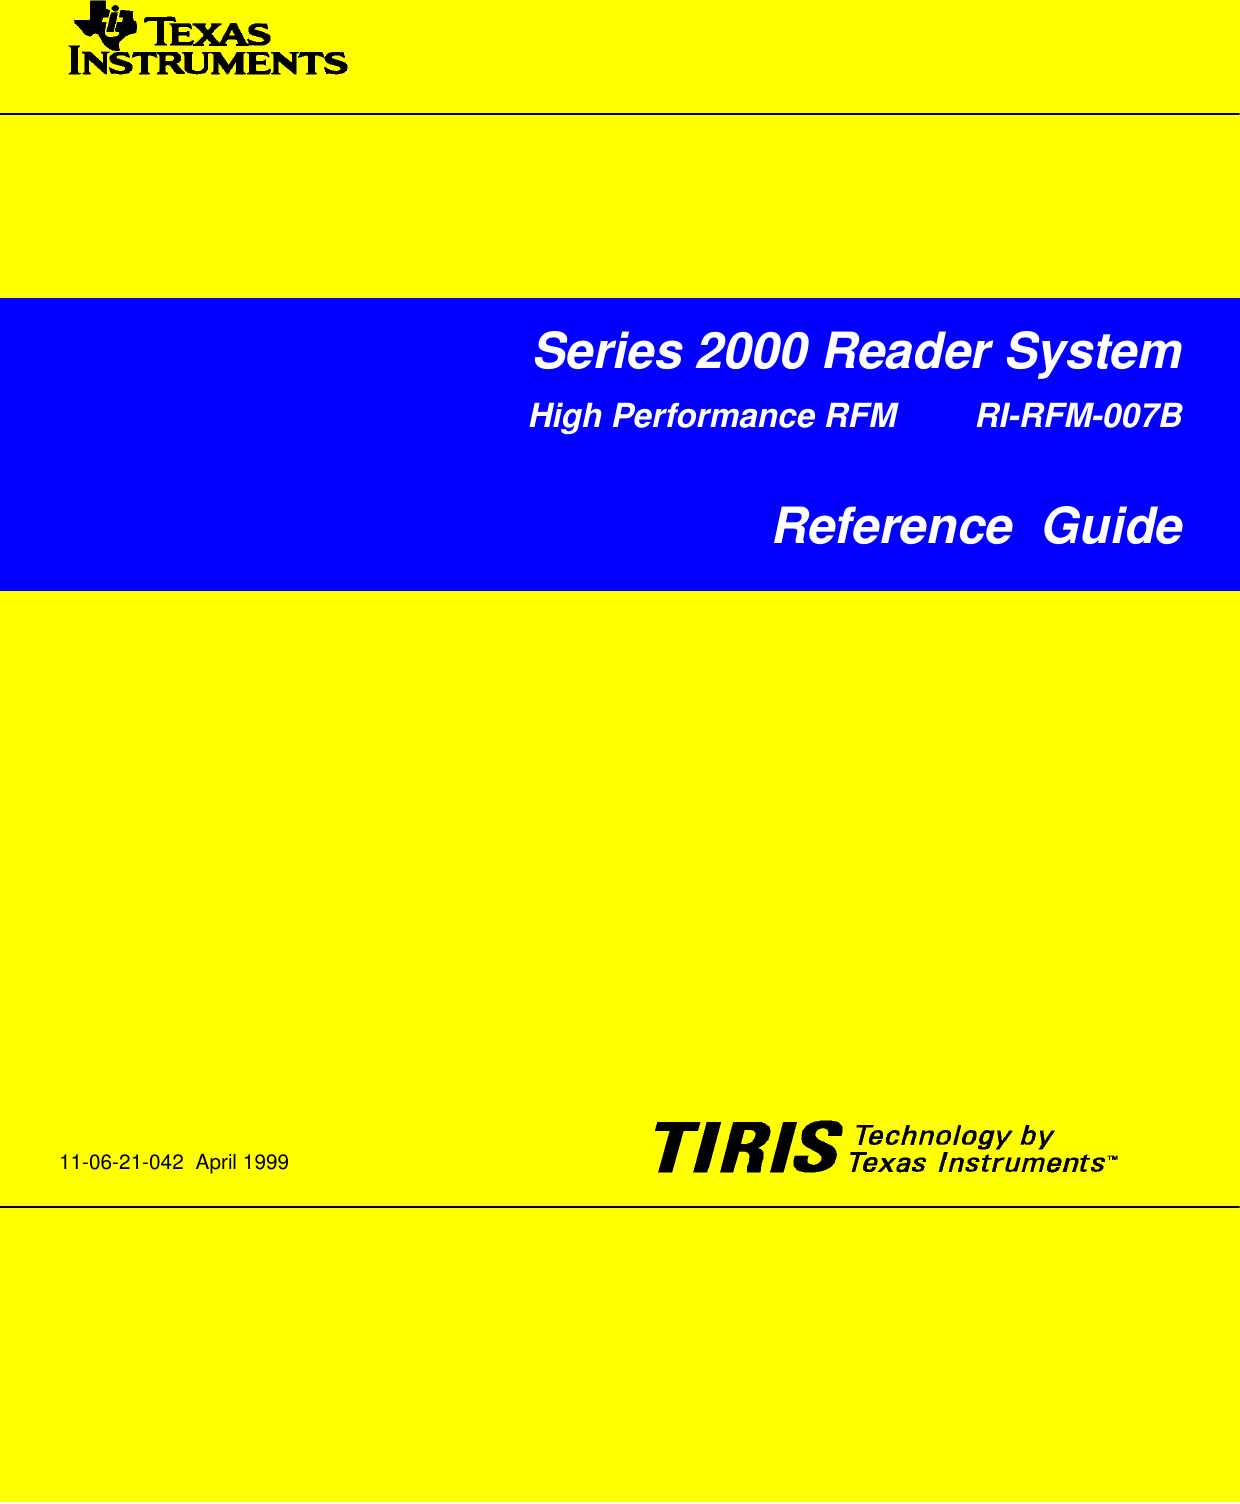 1Series 2000 Reader SystemHigh Performance RFM        RI-RFM-007BReference  Guide11-06-21-042  April 1999